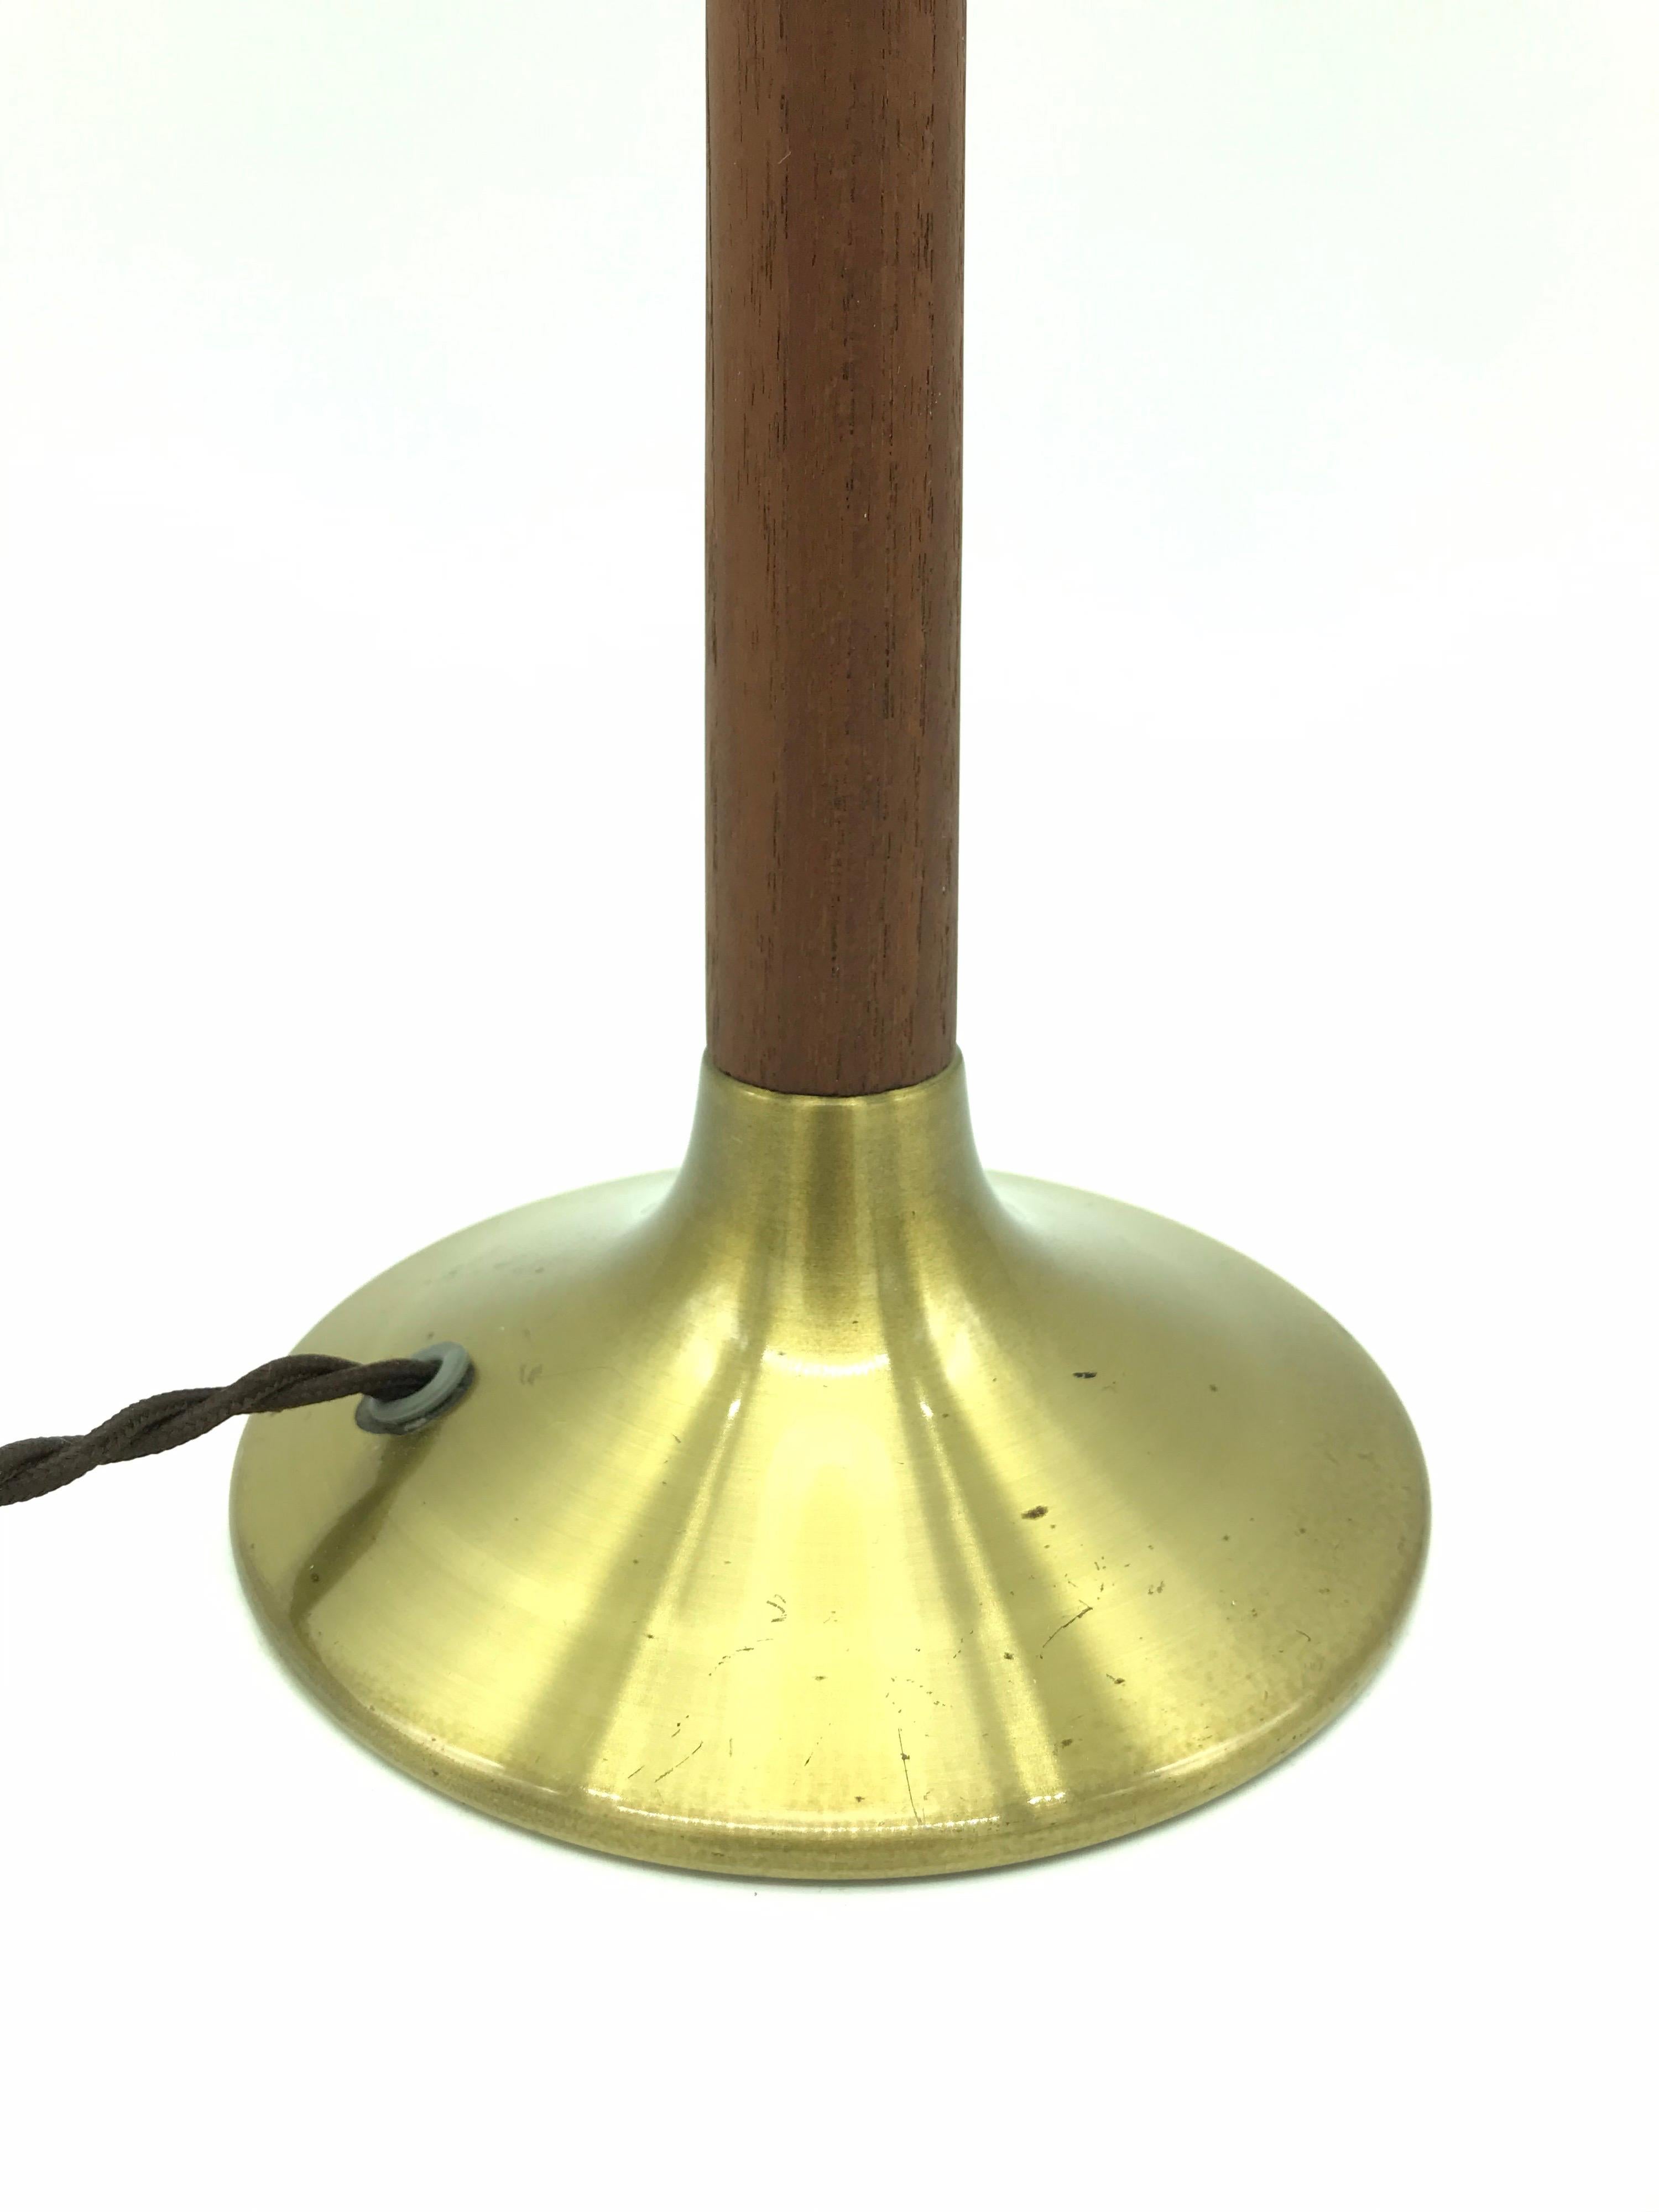 Danish Vintage Holm Sørensen Table Lamp from the 1950s For Sale